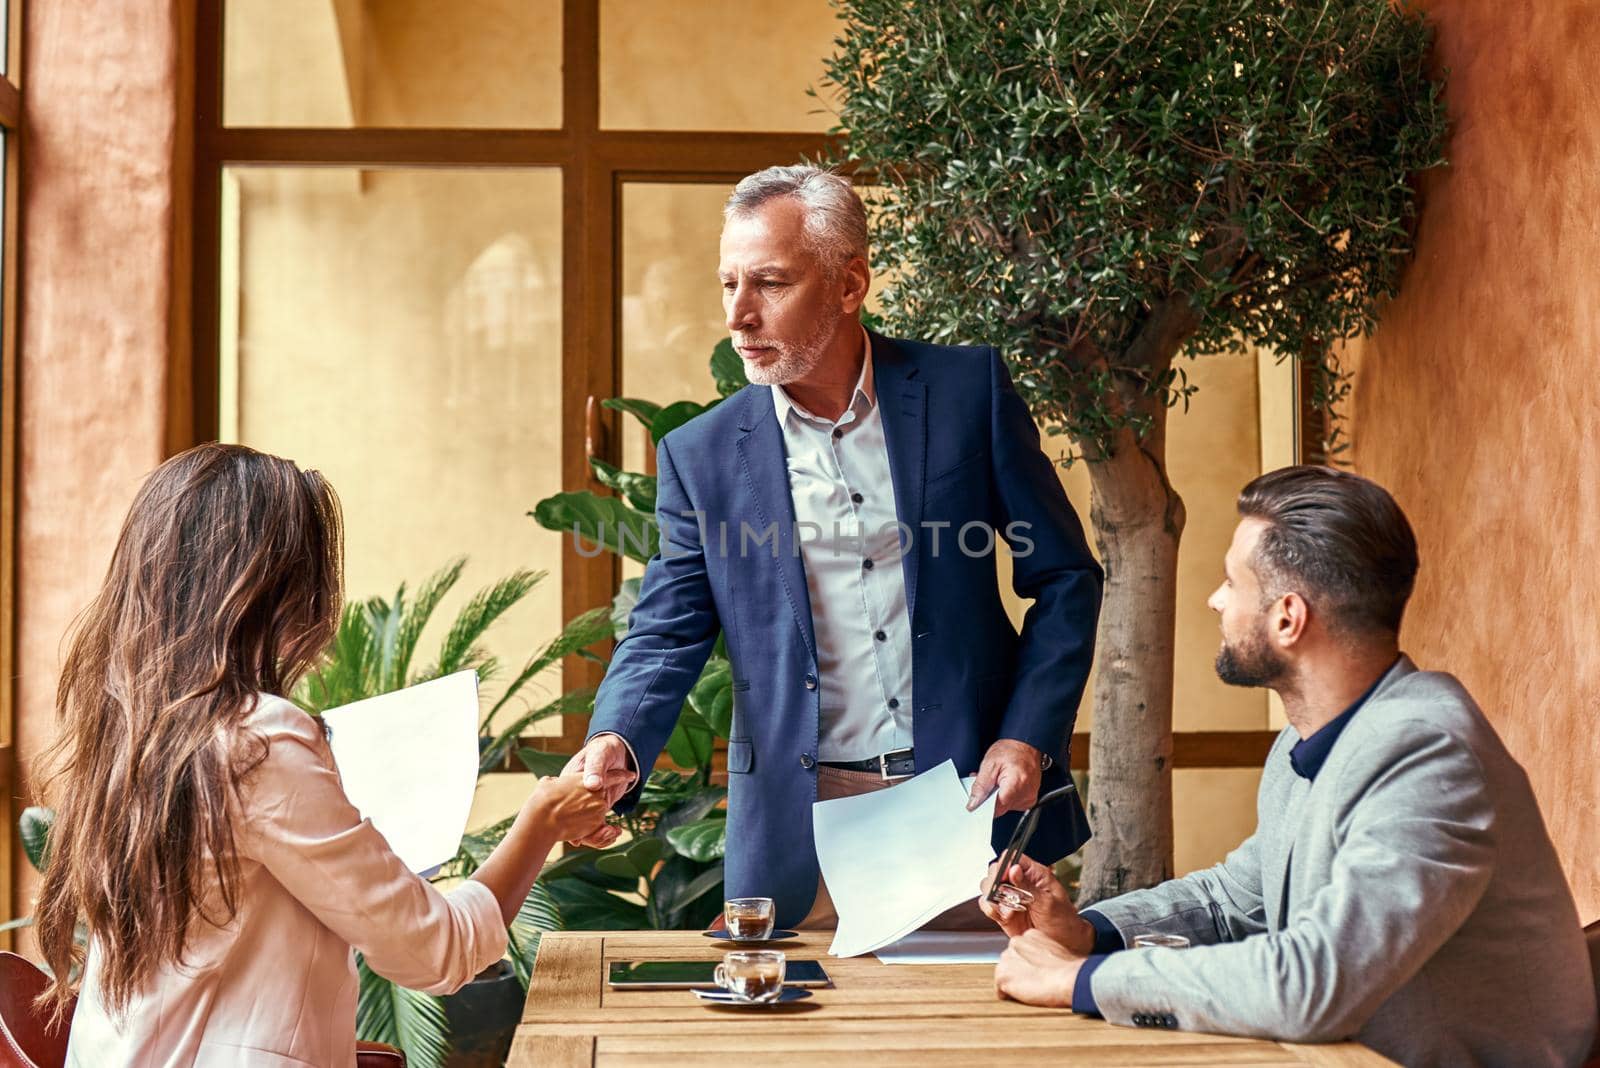 Business lunch. Three people in the restaurant sitting at table making deal senior man shaking hands with young woman. Agreement concept by friendsstock